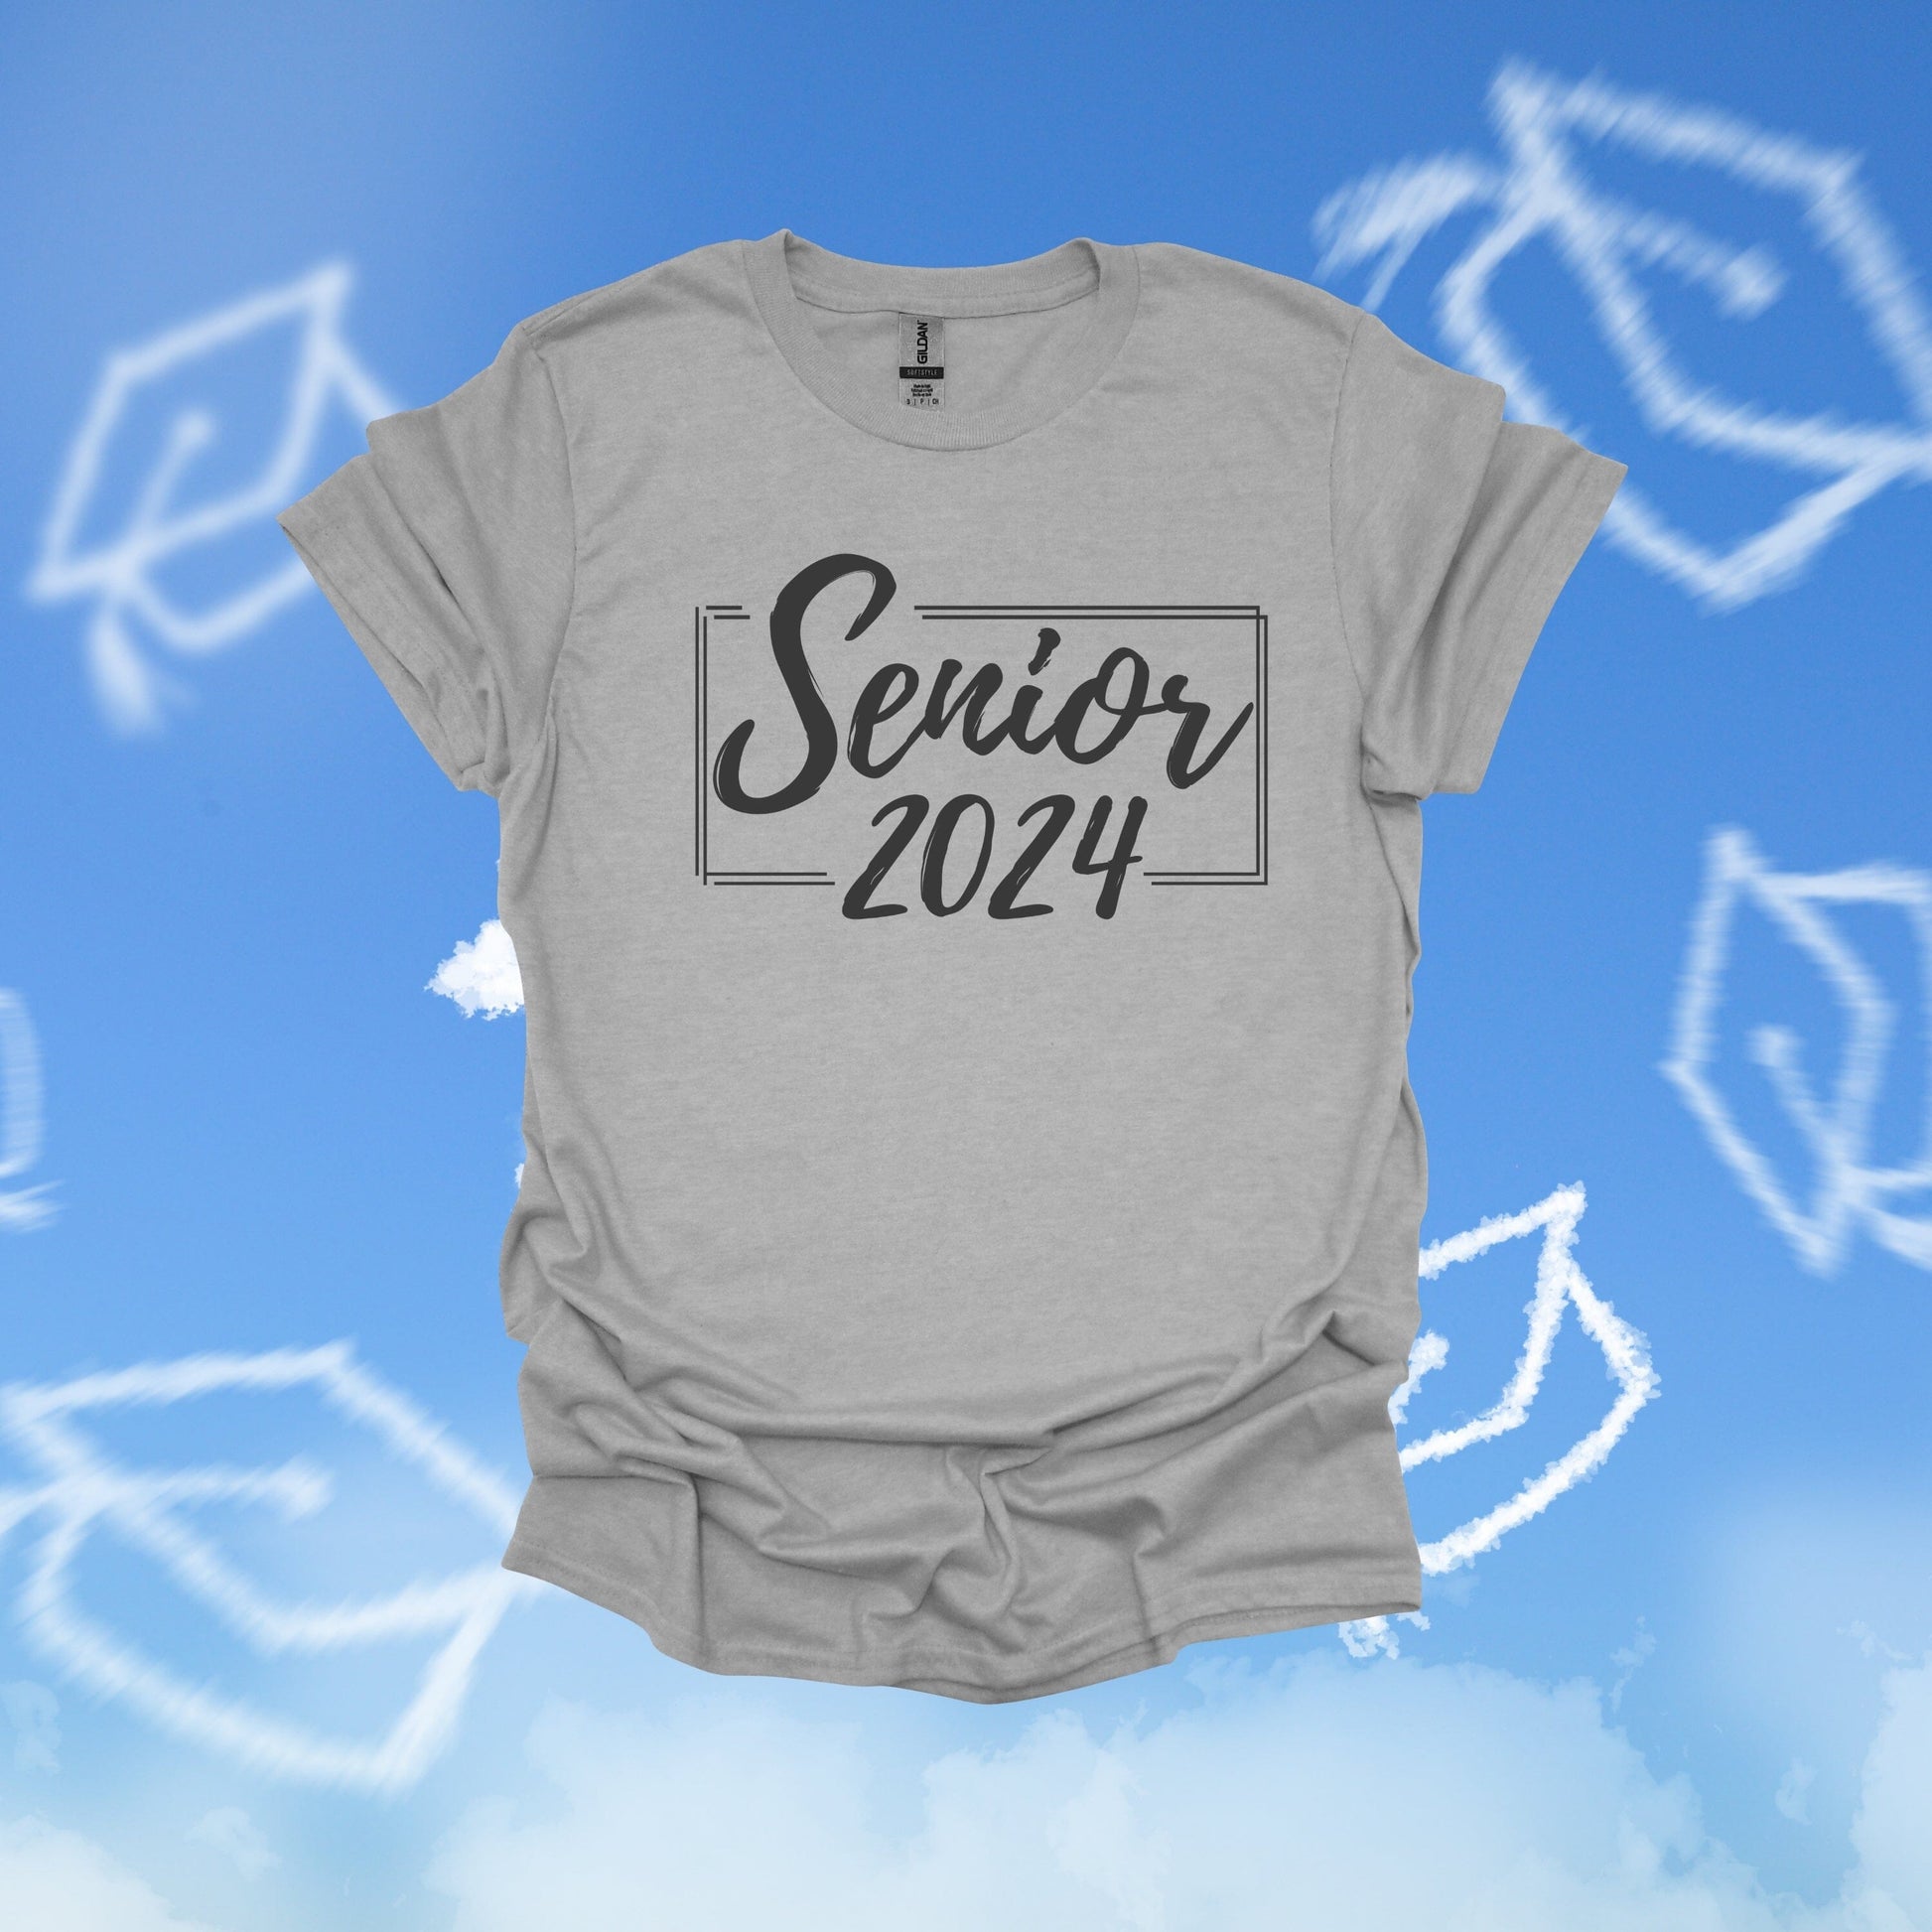 Senior 2024 - Graduation - Custom Colors Available - Adult Tee Shirts T-Shirts Graphic Avenue Sport Grey Adult Small 